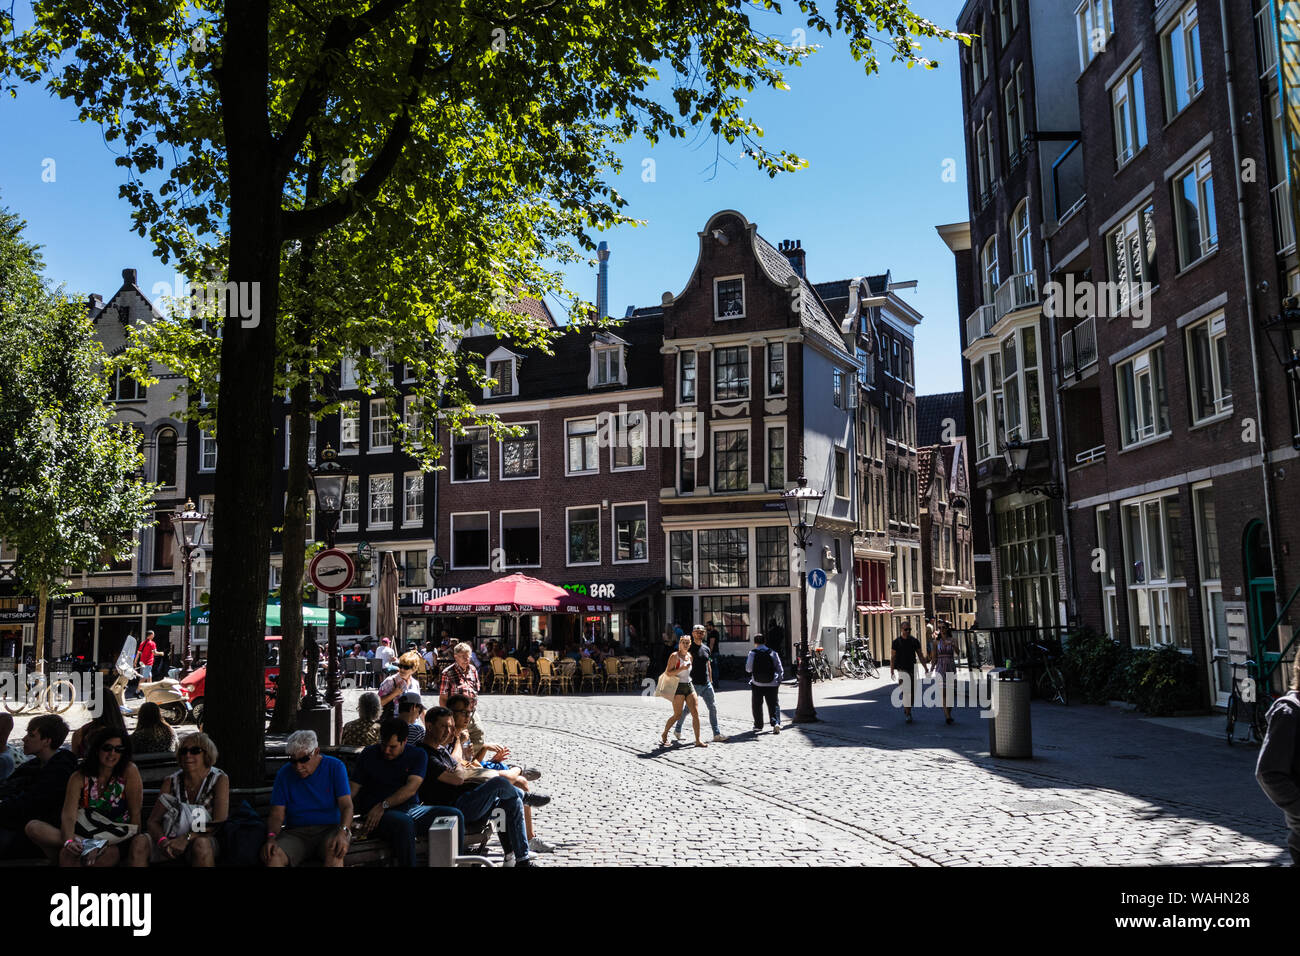 The Old Church Square (Oudekerksplein) in Amsterdam Stock Photo